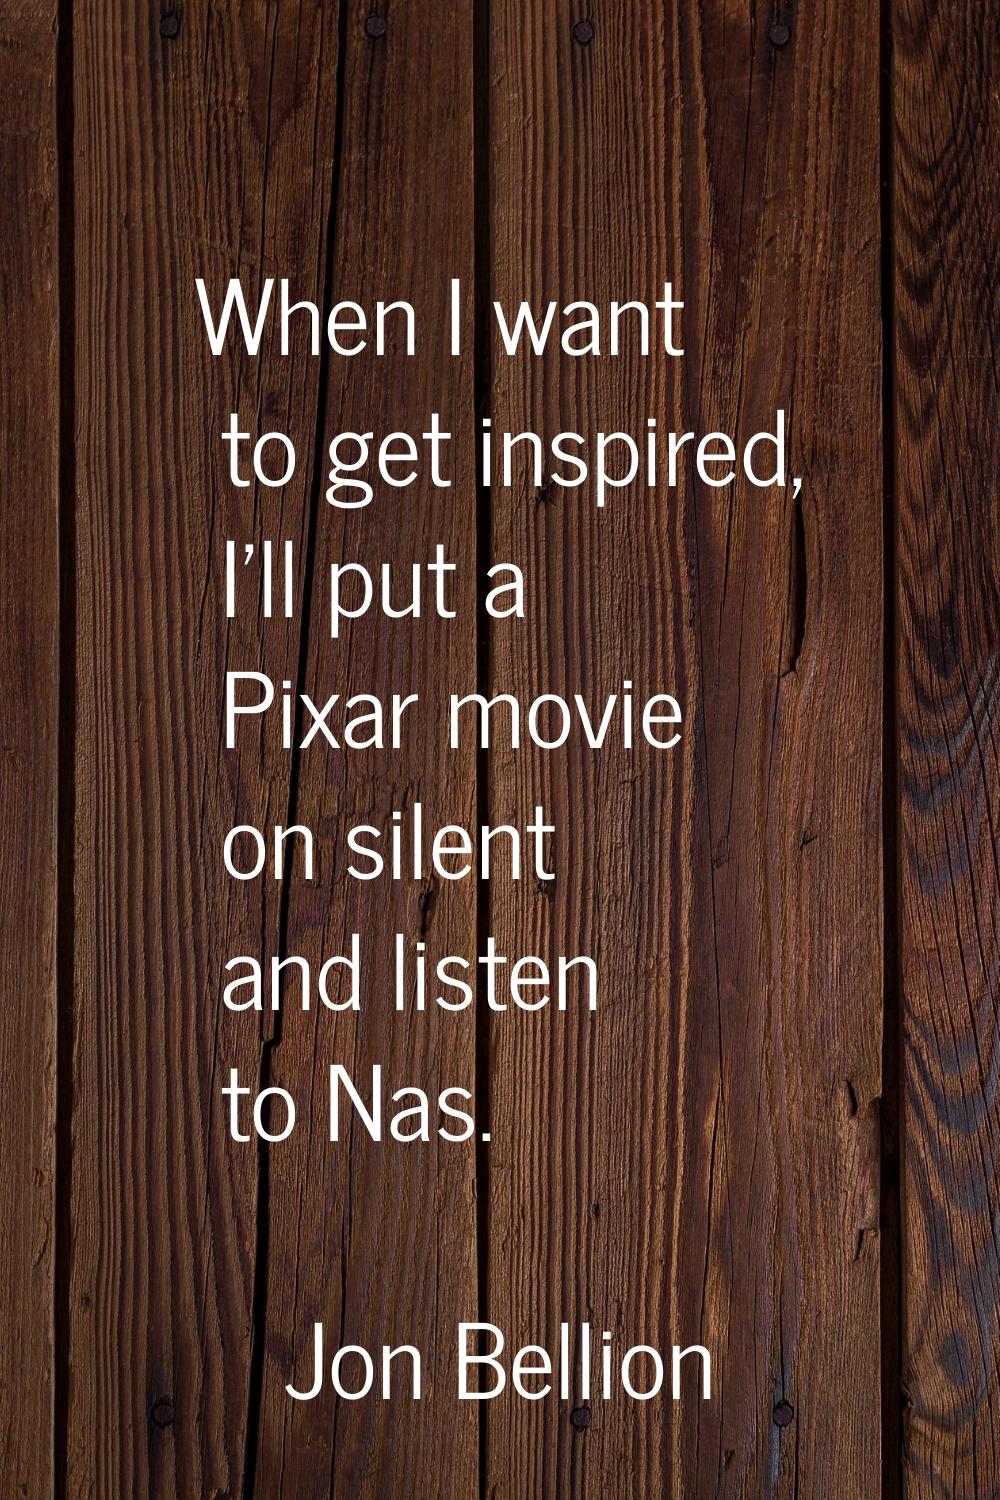 When I want to get inspired, I'll put a Pixar movie on silent and listen to Nas.